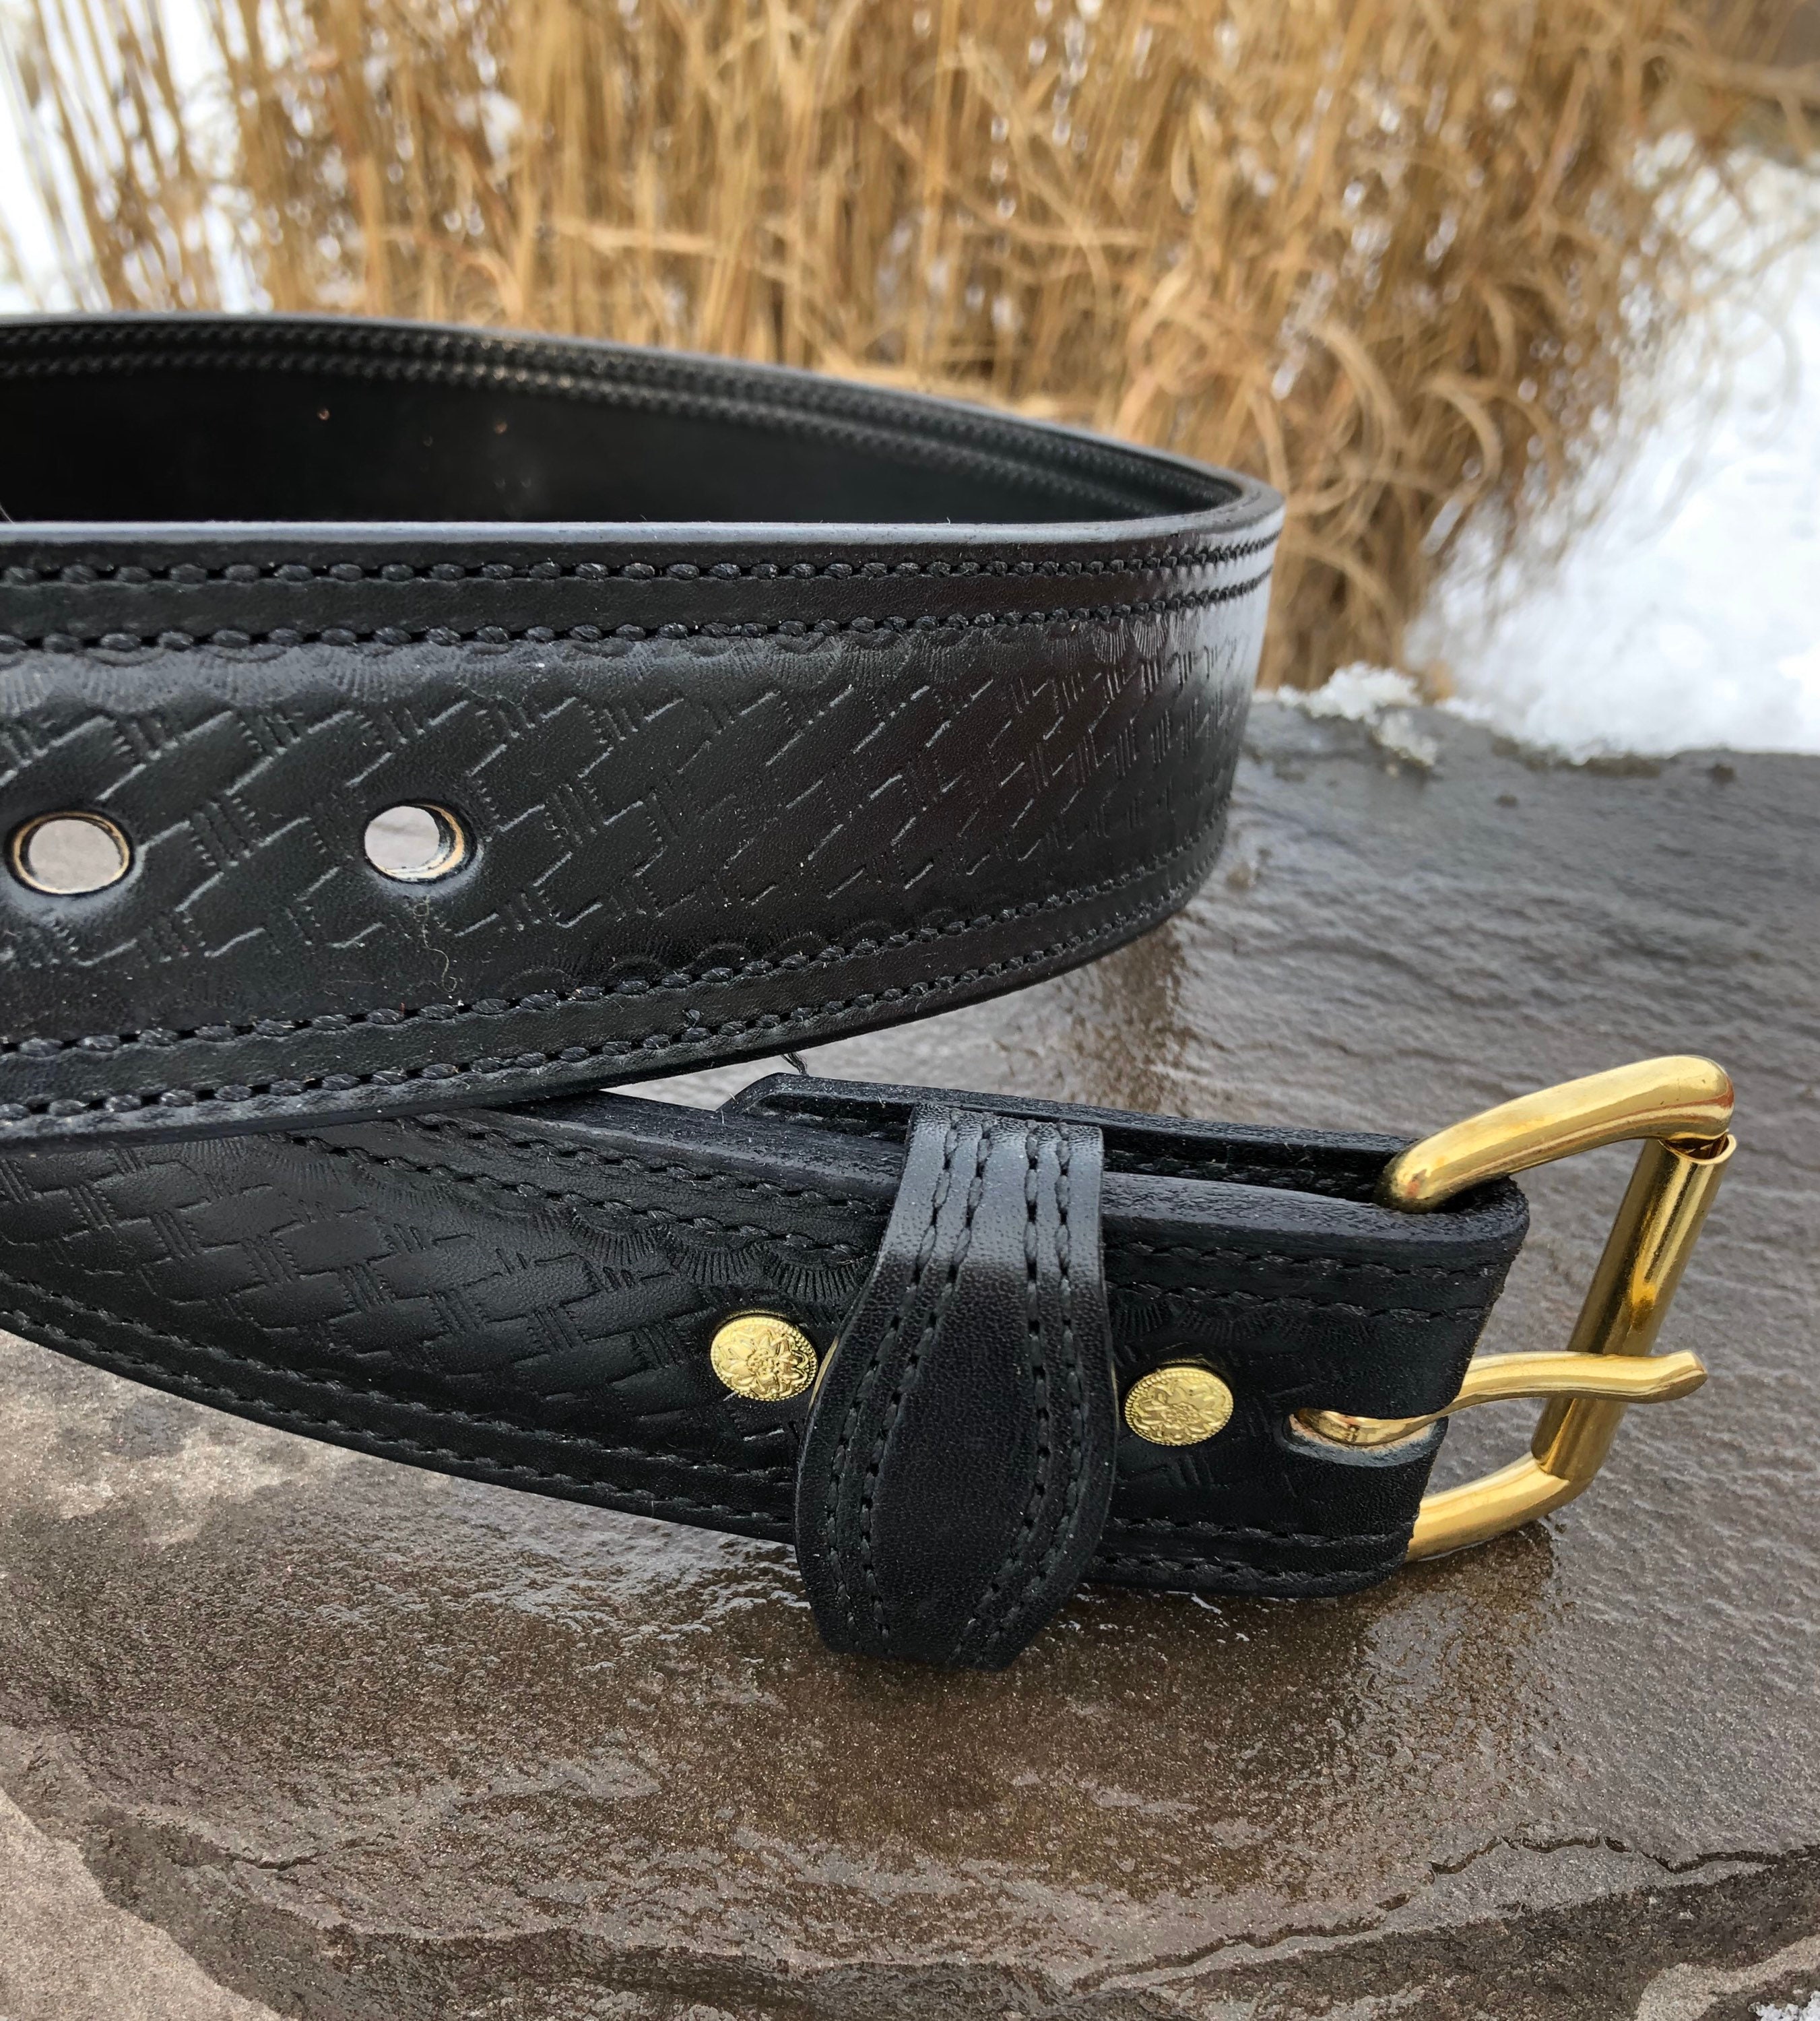 Leather belt, Western Stitched-Suede-lined, Thick, vegetable-tanned leather  belt, Can be a concealed carry belt or gun belt